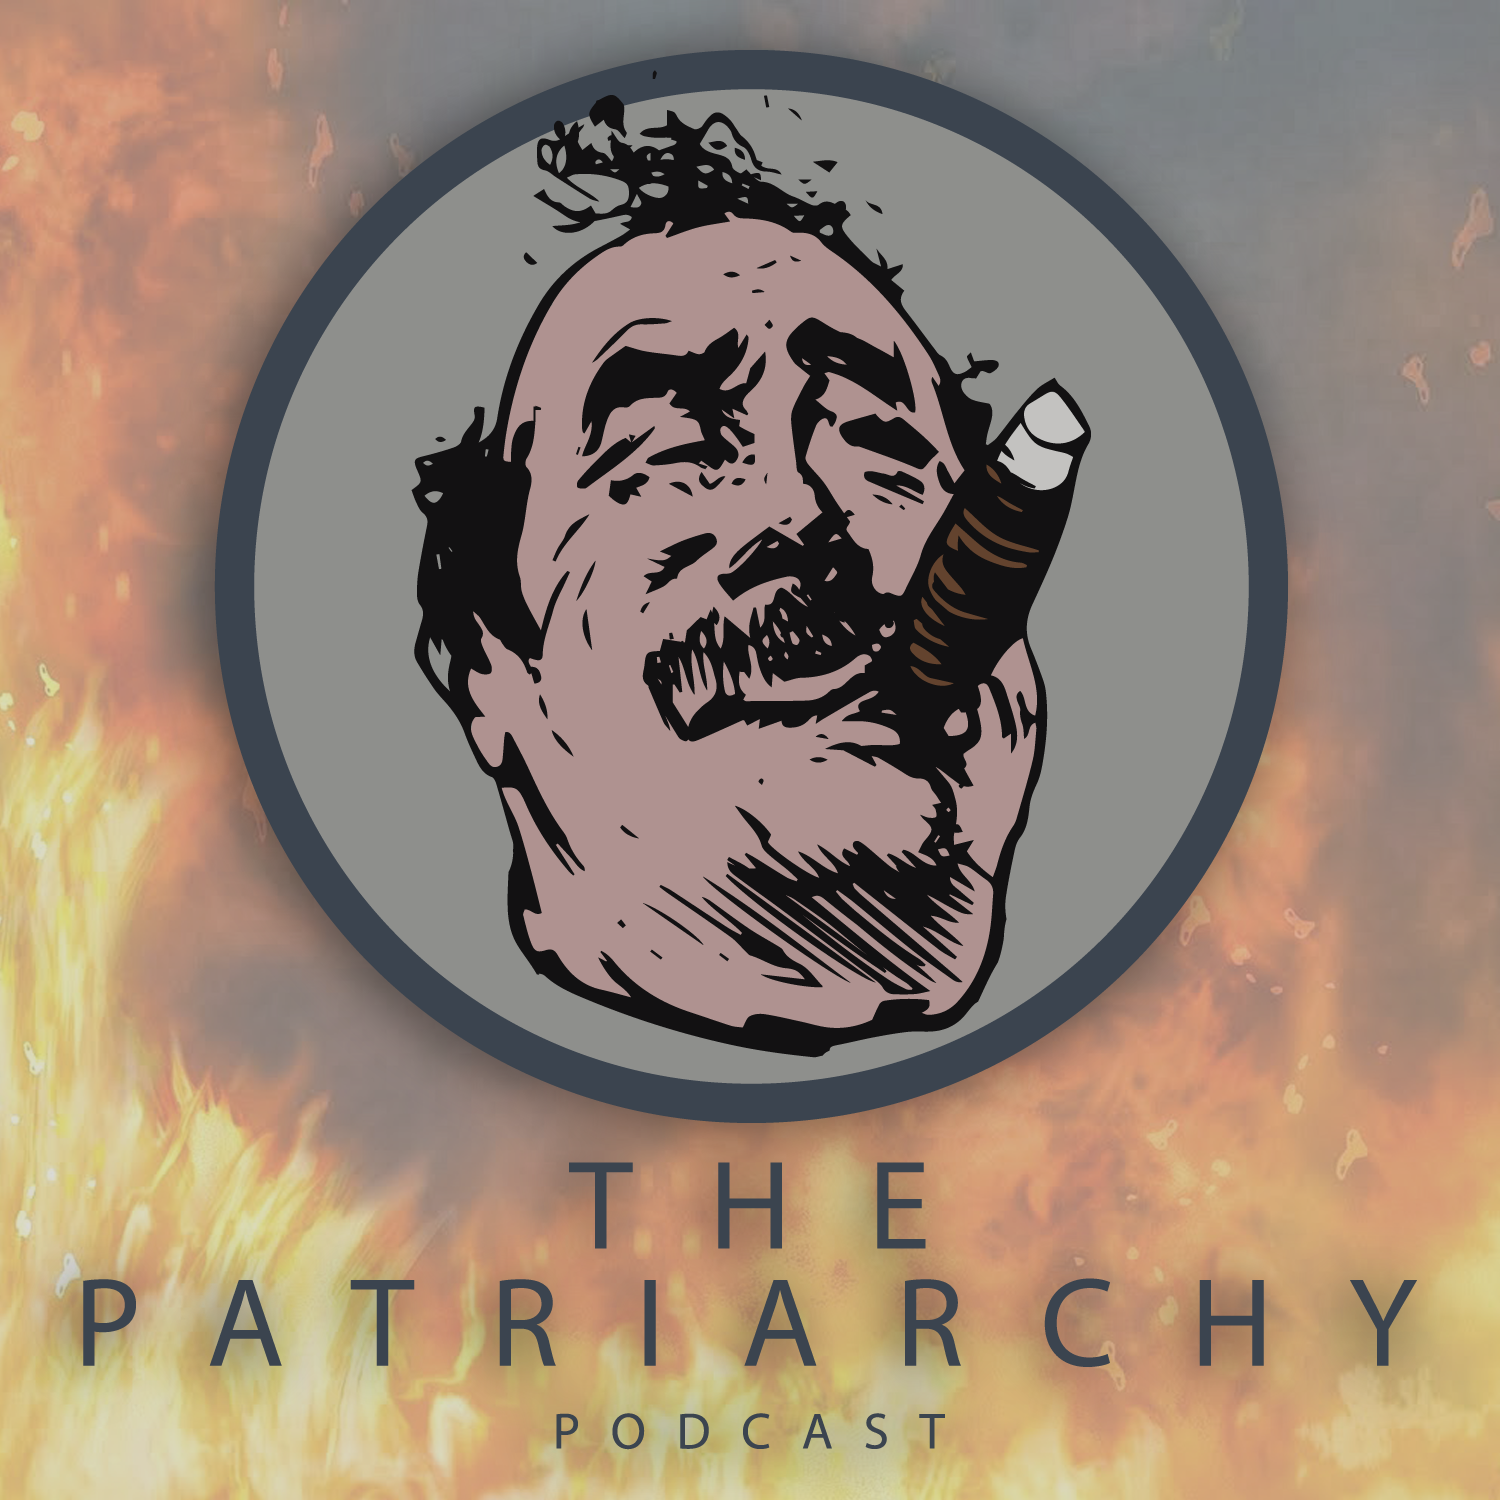 The Patriarchy Podcast: Self Help Me (Ep 37)